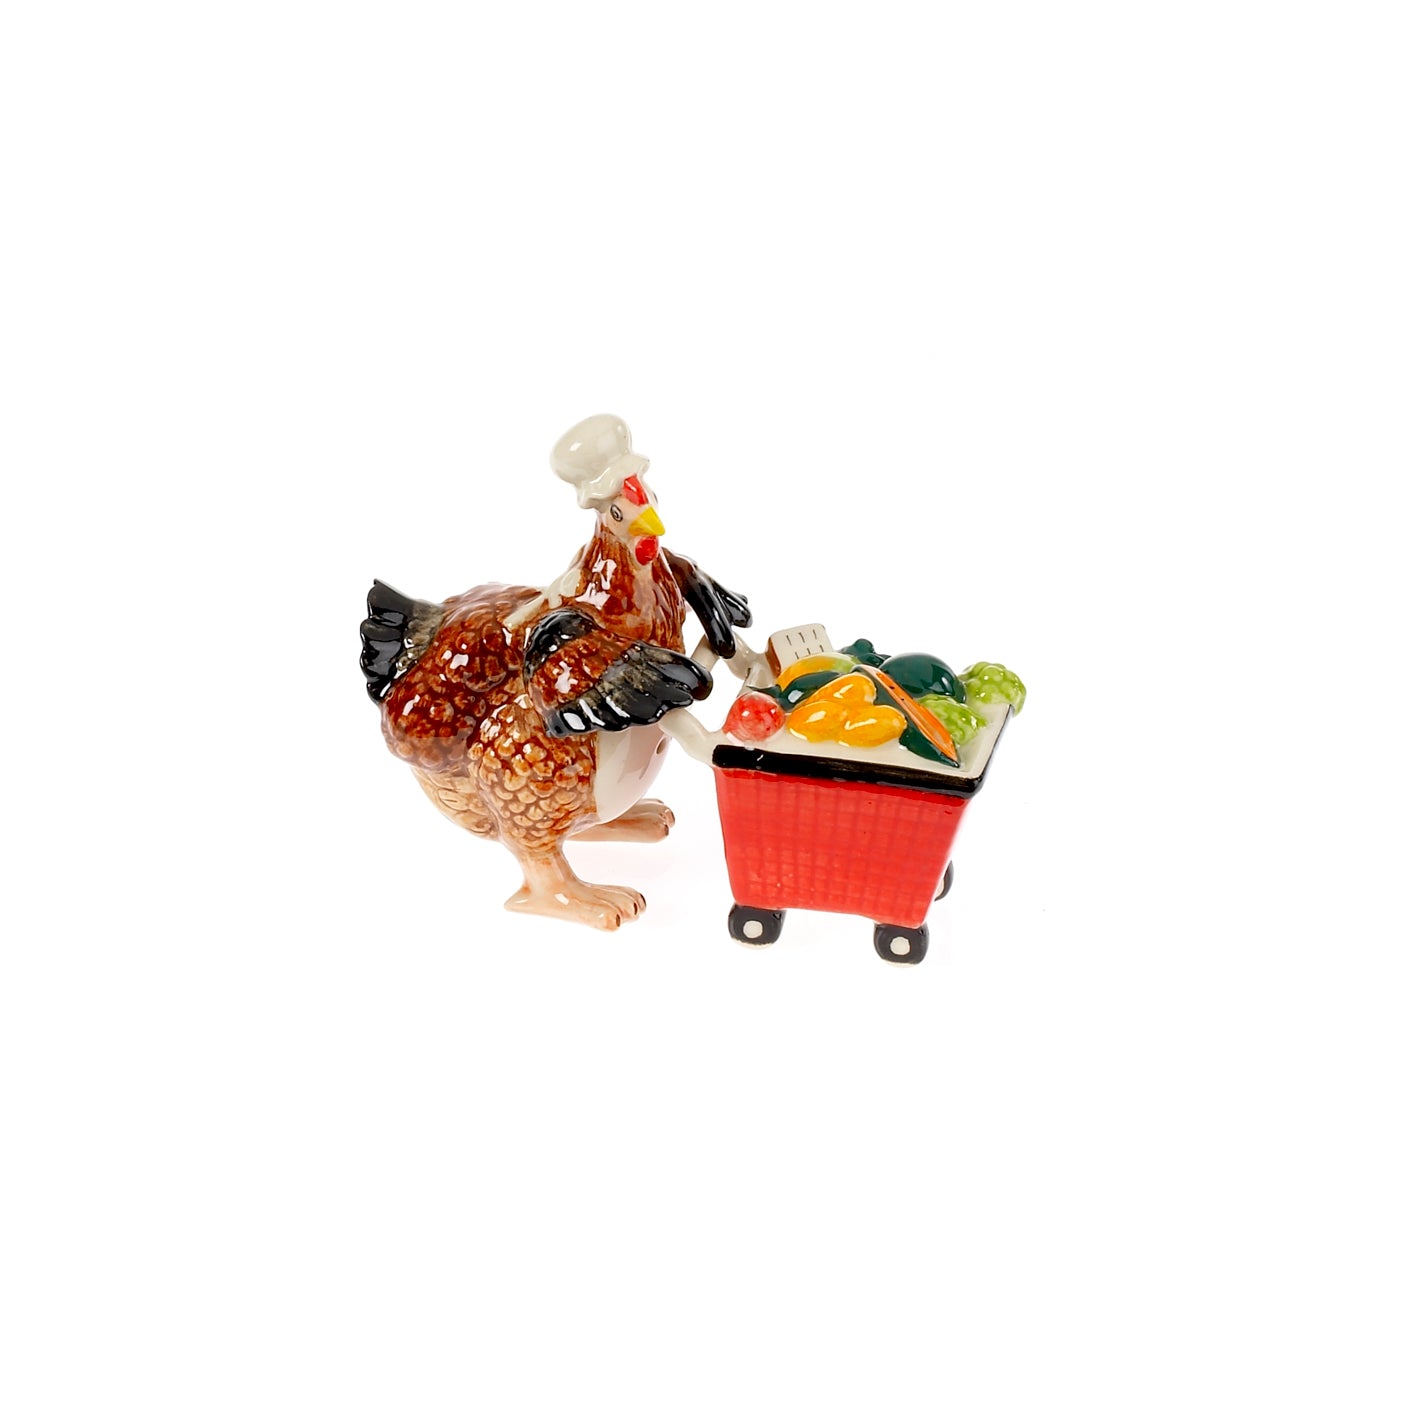 Hen and Shopping Trolley Salt and Pepper